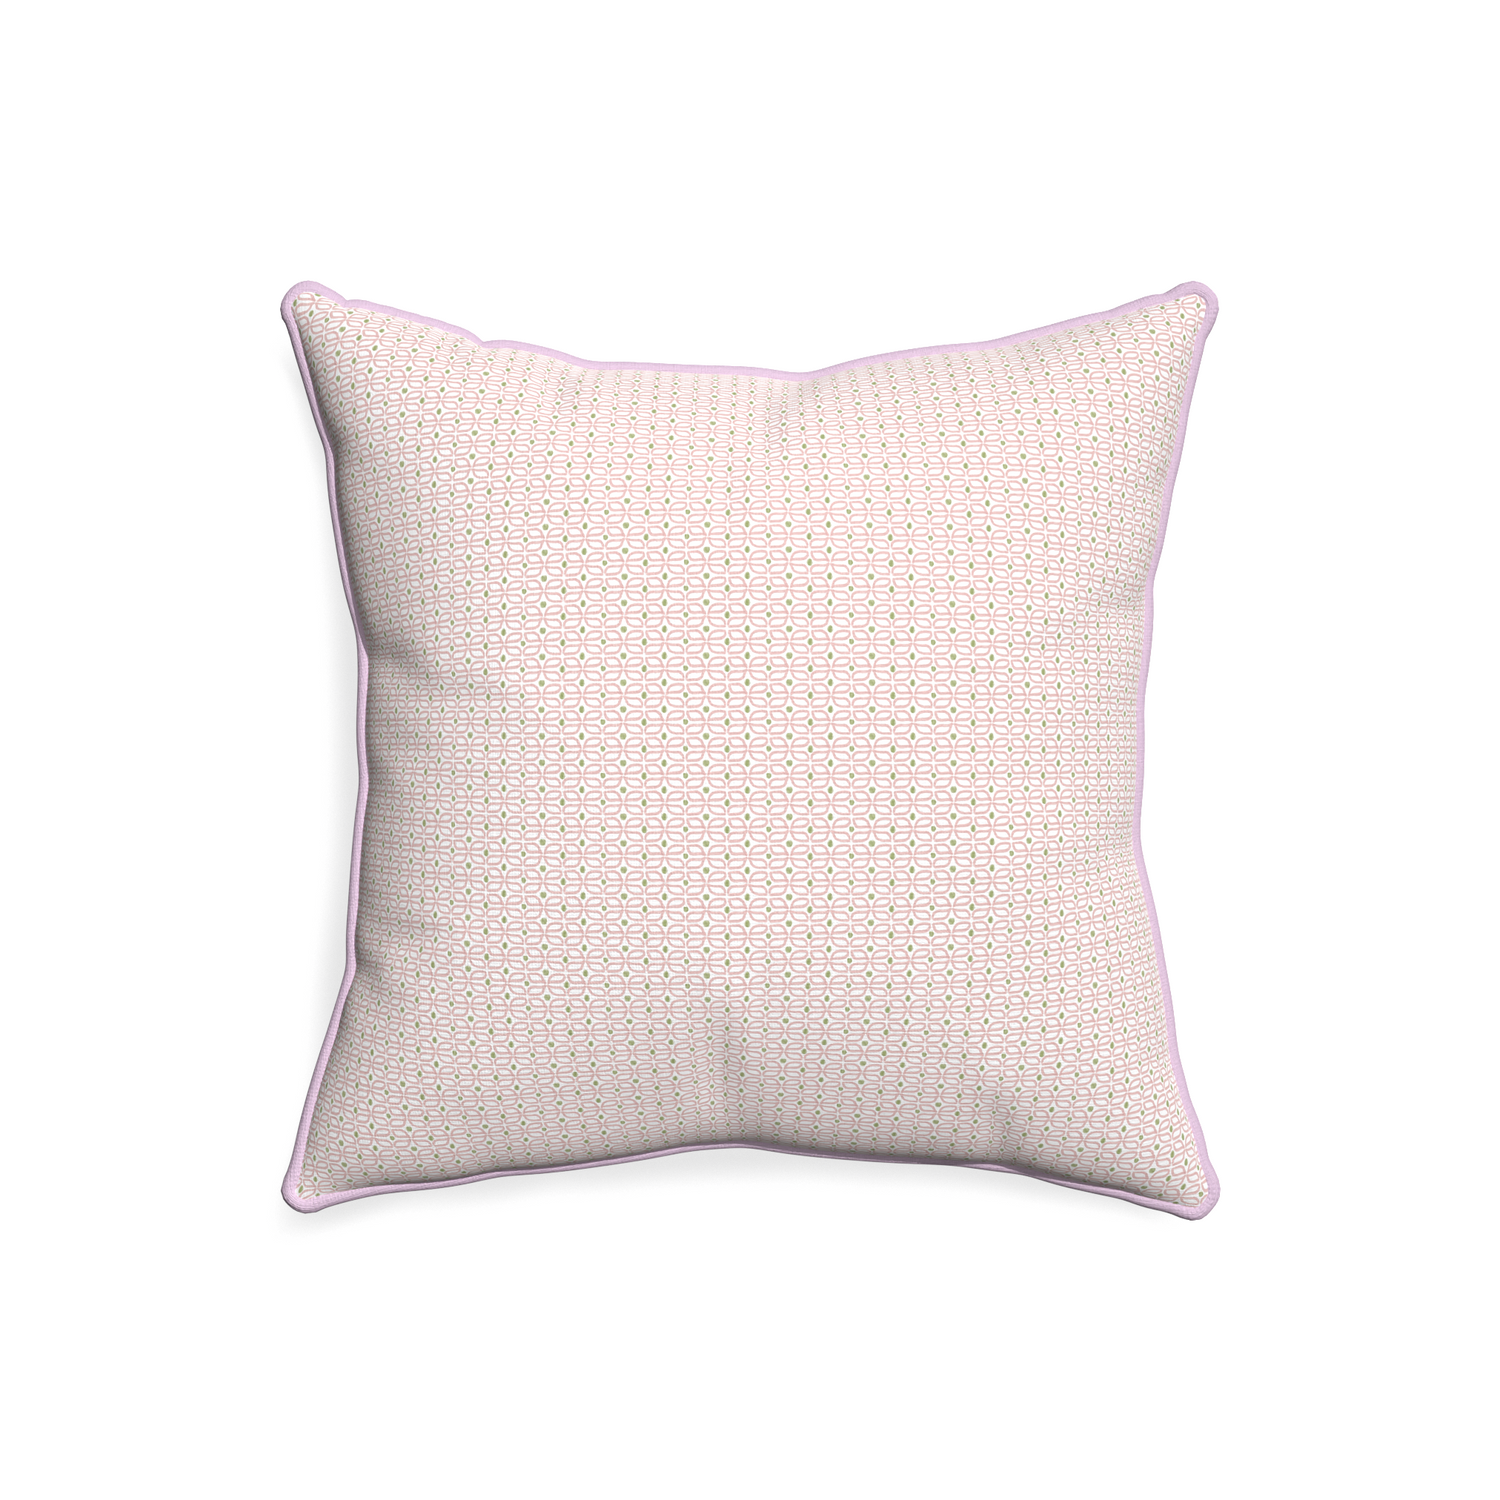 20-square loomi pink custom pink geometricpillow with l piping on white background